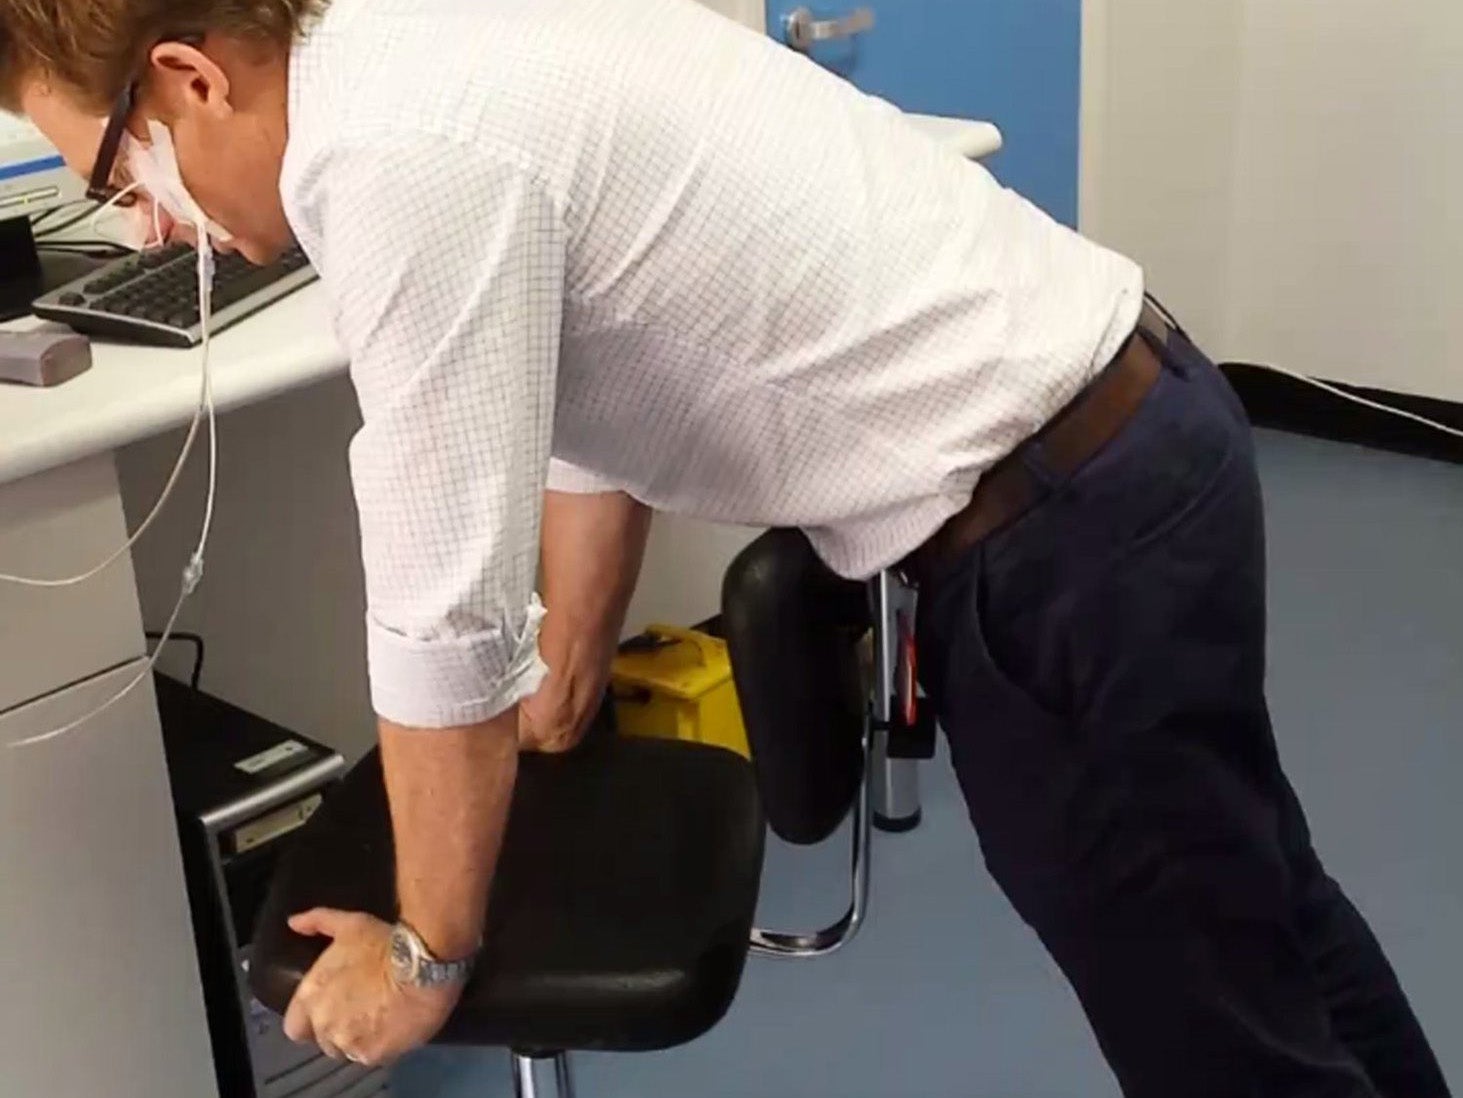 A researcher demonstrates how to perform 'chair thrusts'